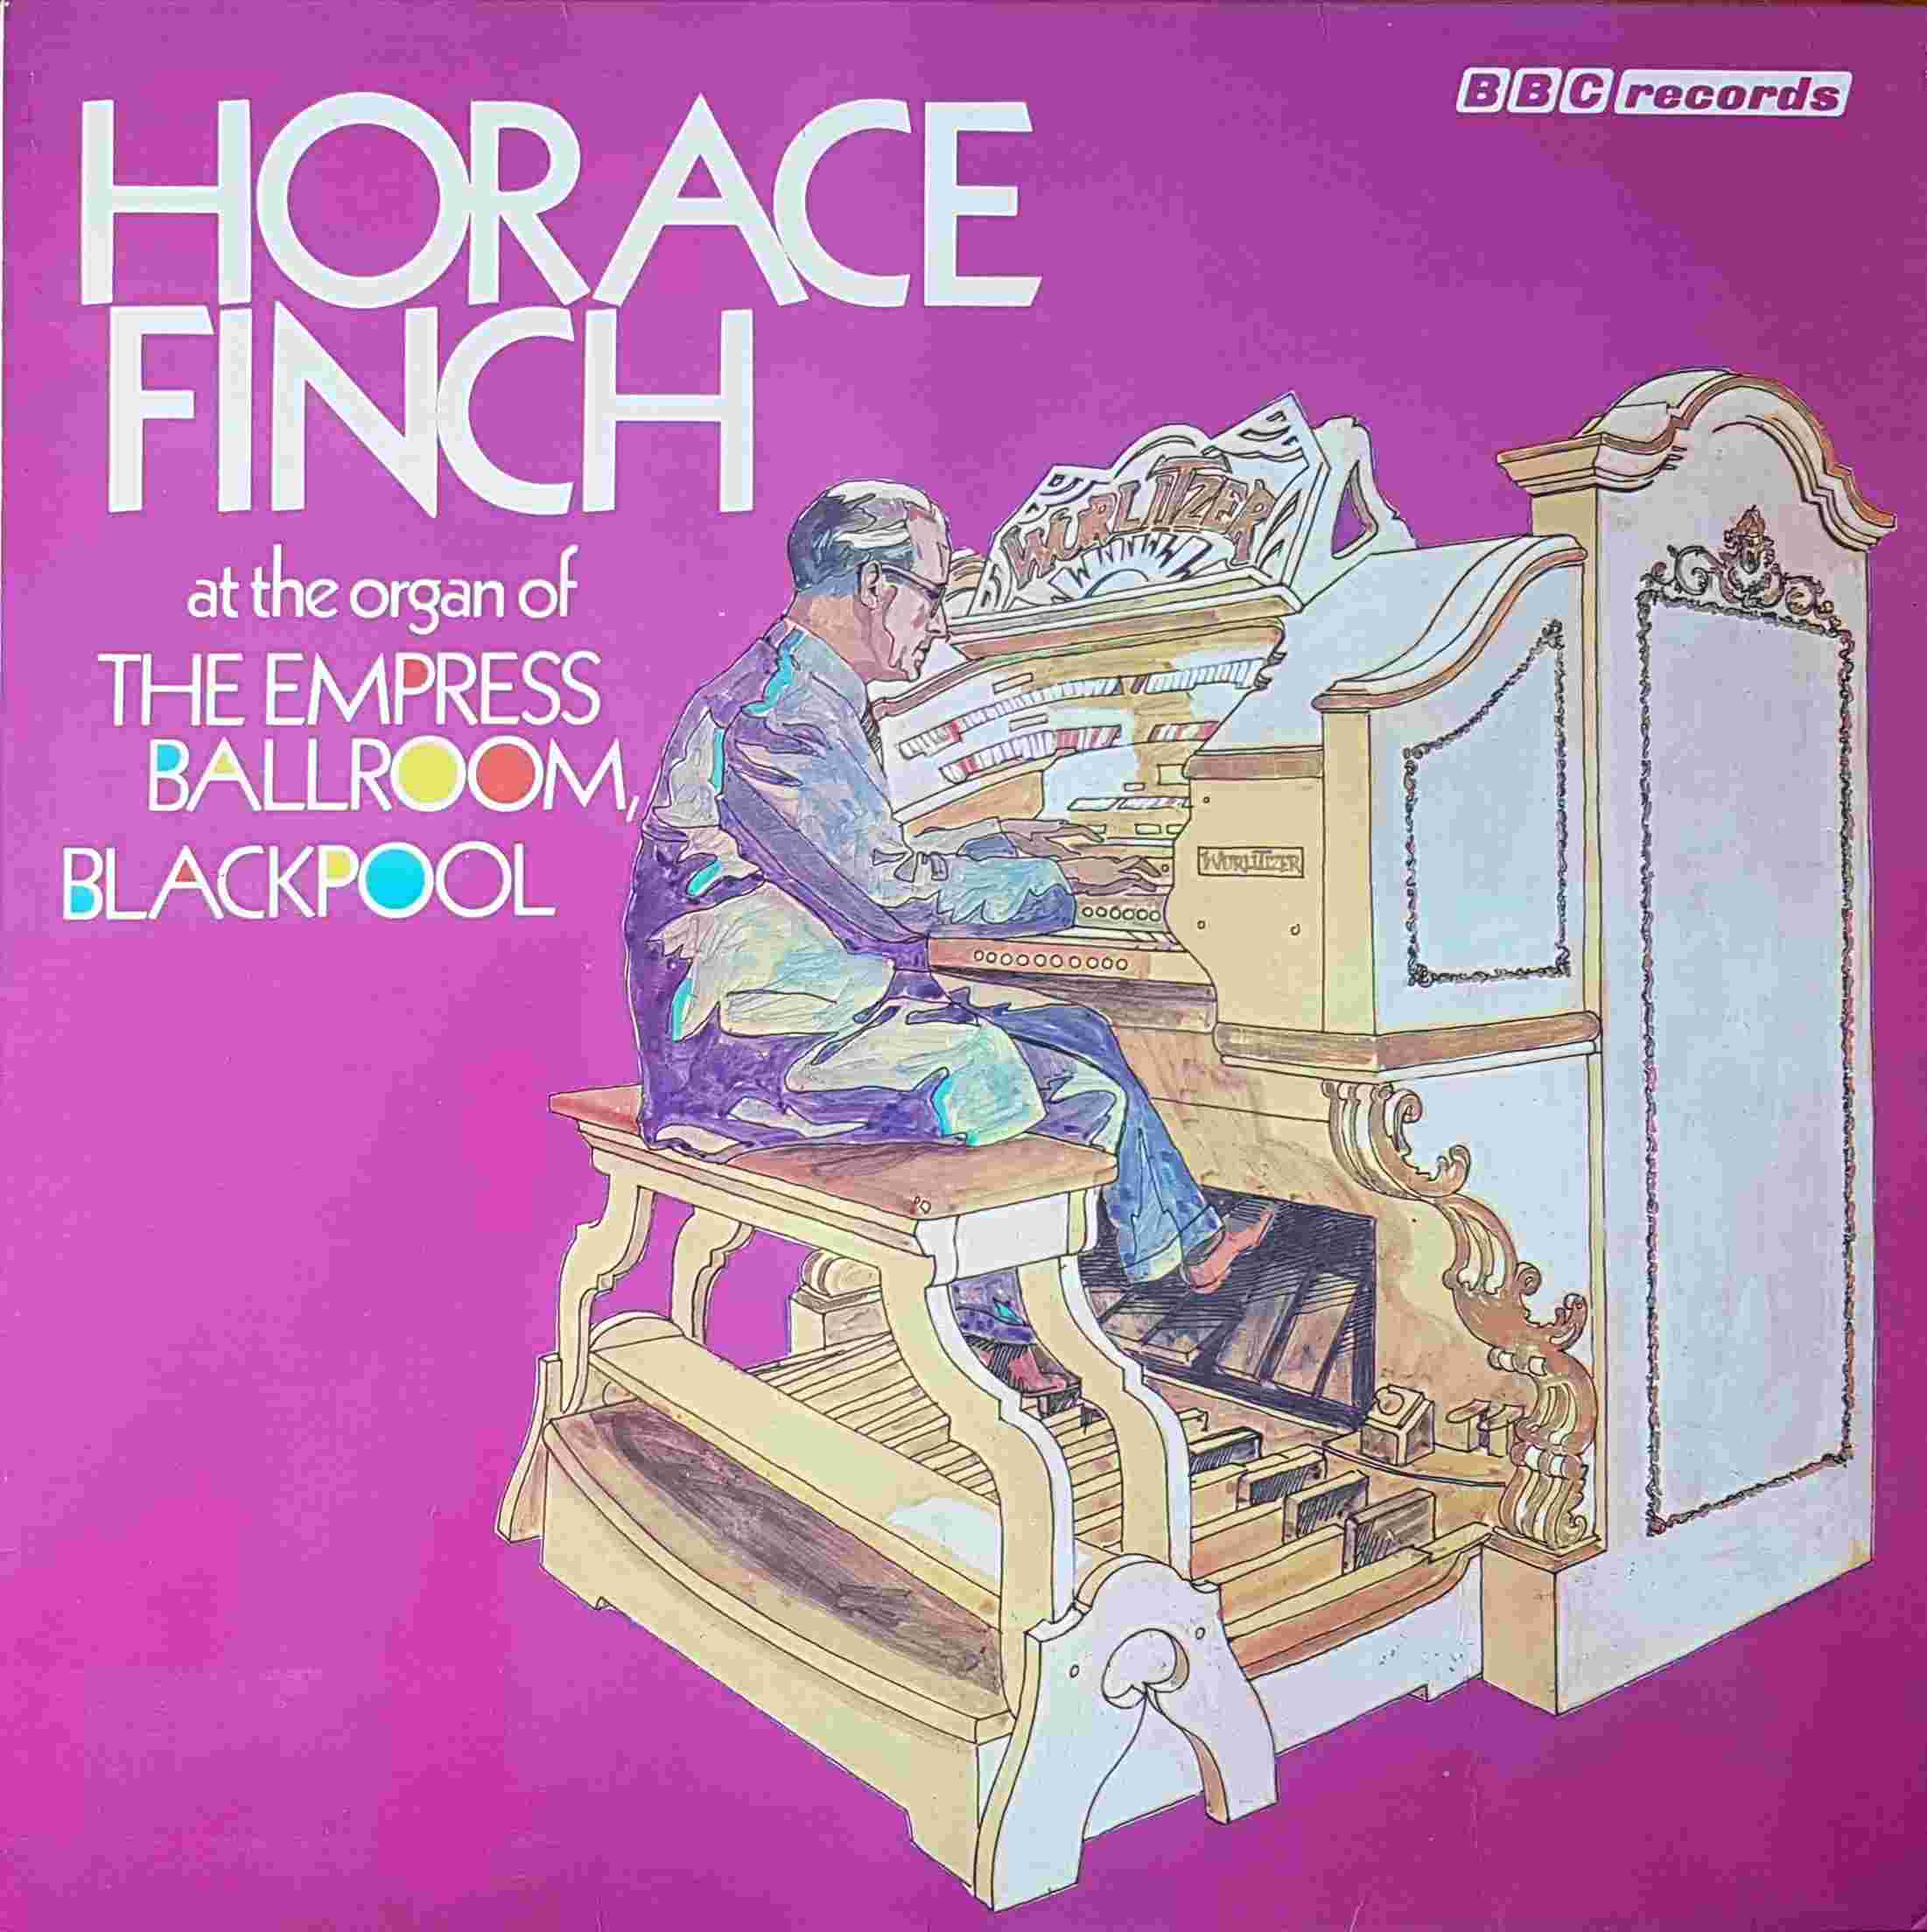 Picture of REC 129 Horace Finch at the organ of the Empress Ballroom, Blackpool by artist Various from the BBC albums - Records and Tapes library